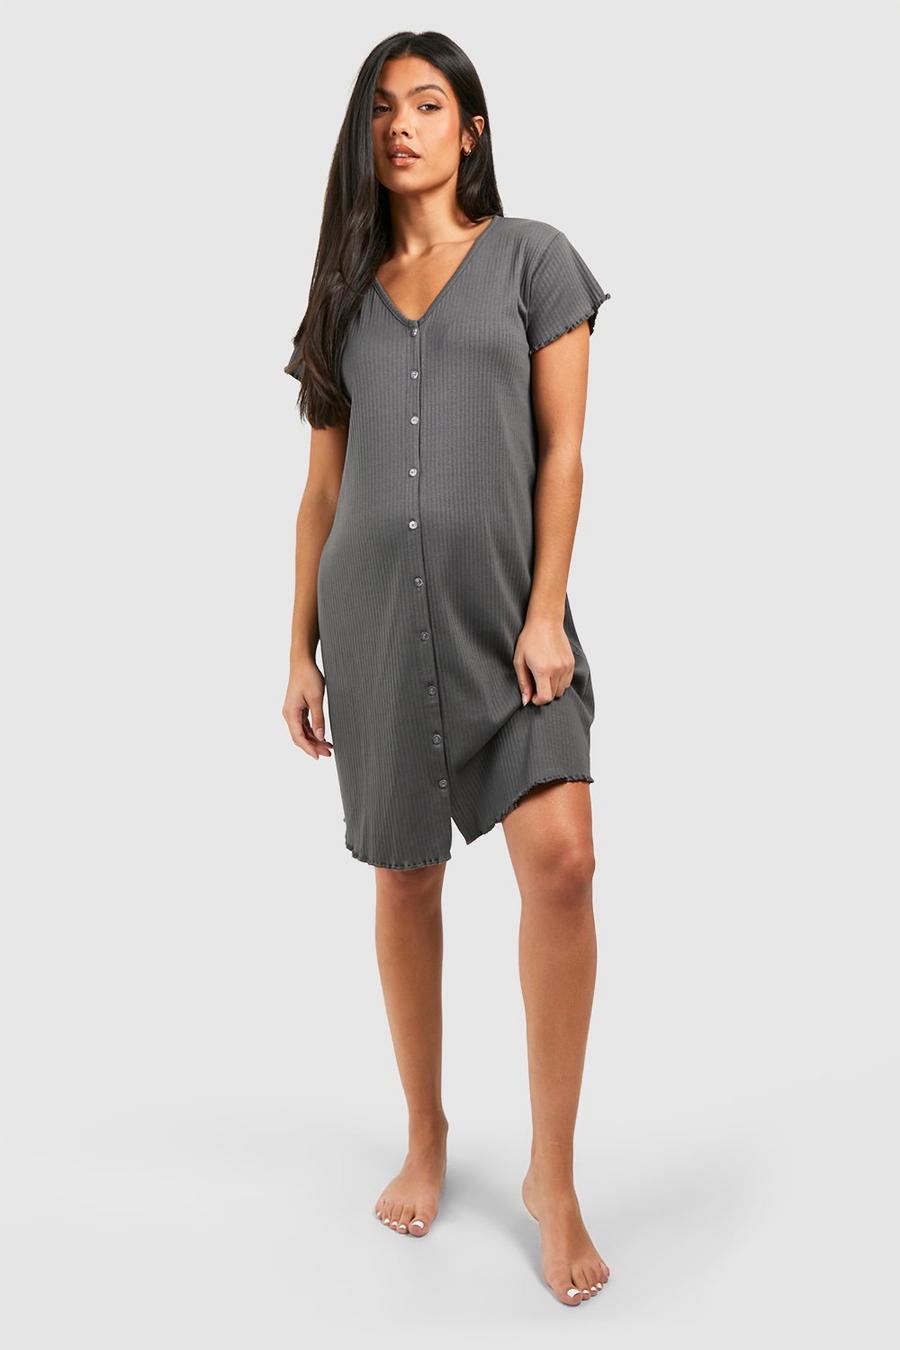 Charcoal grey Maternity Ribbed Button Down Nightie